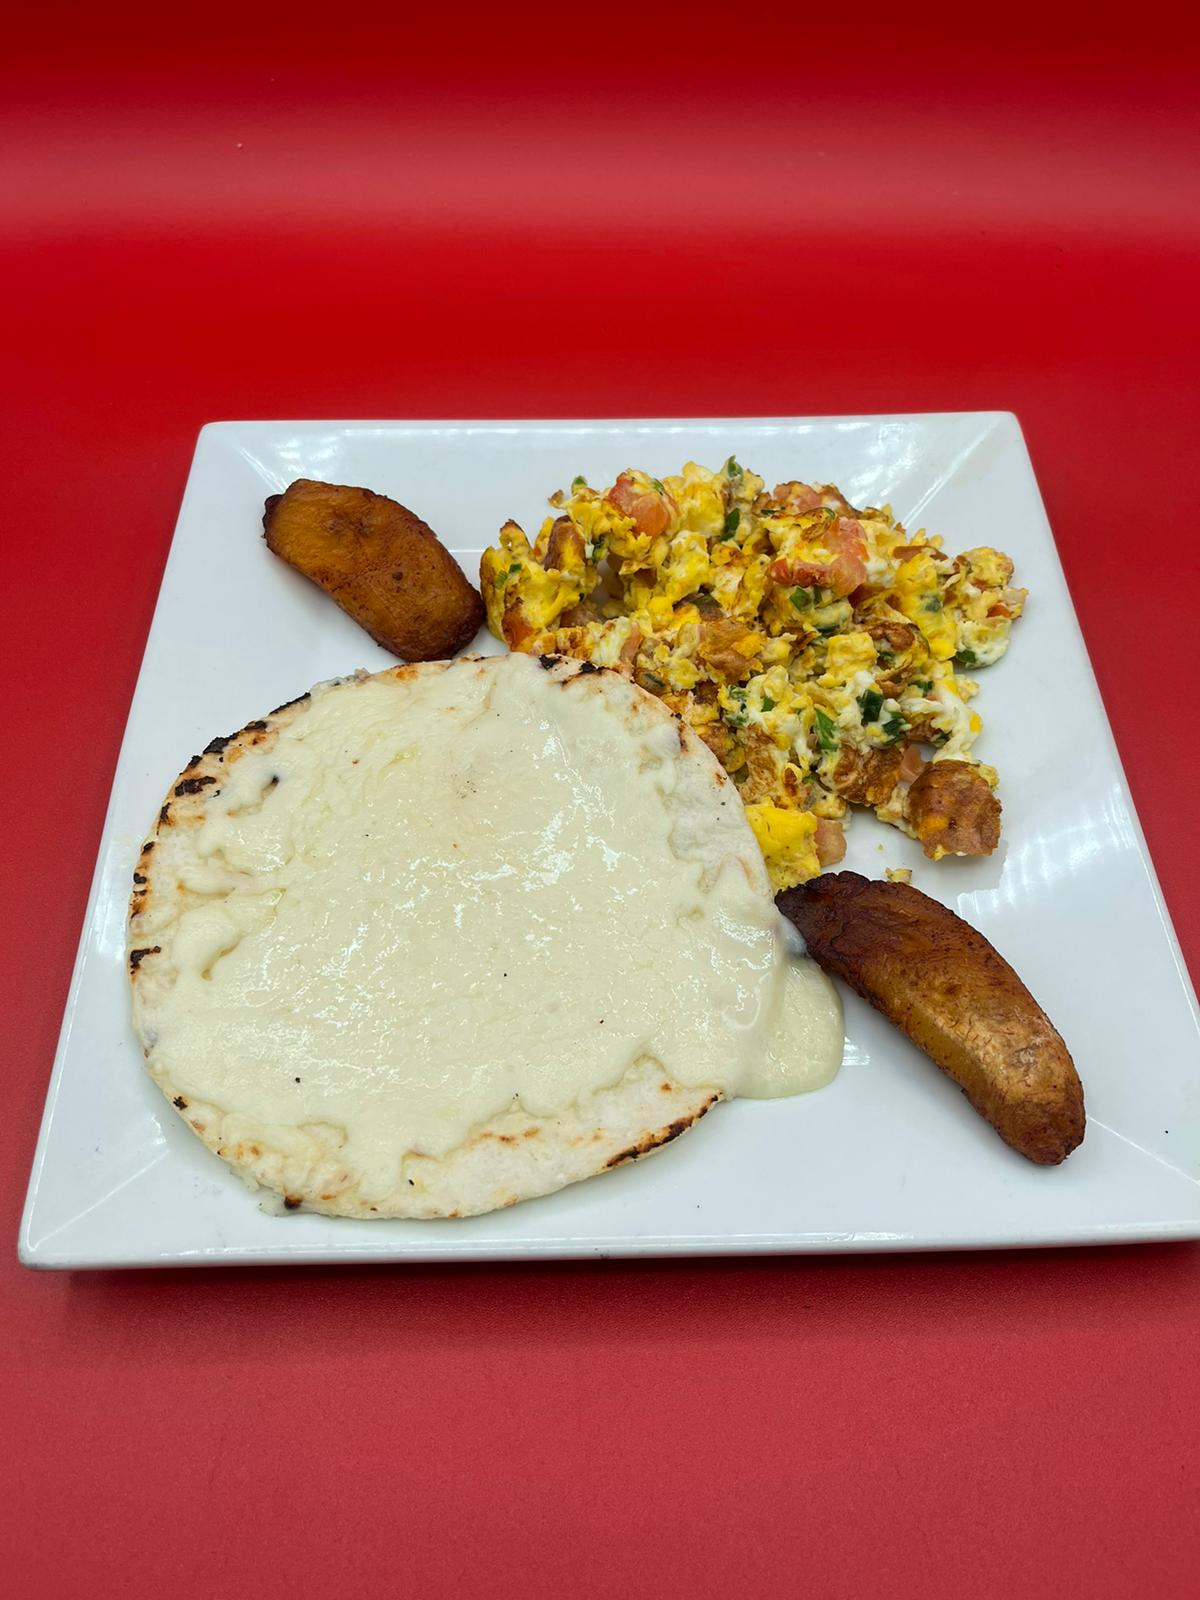 A plate with eggs, potatoes, and bread on a red background.